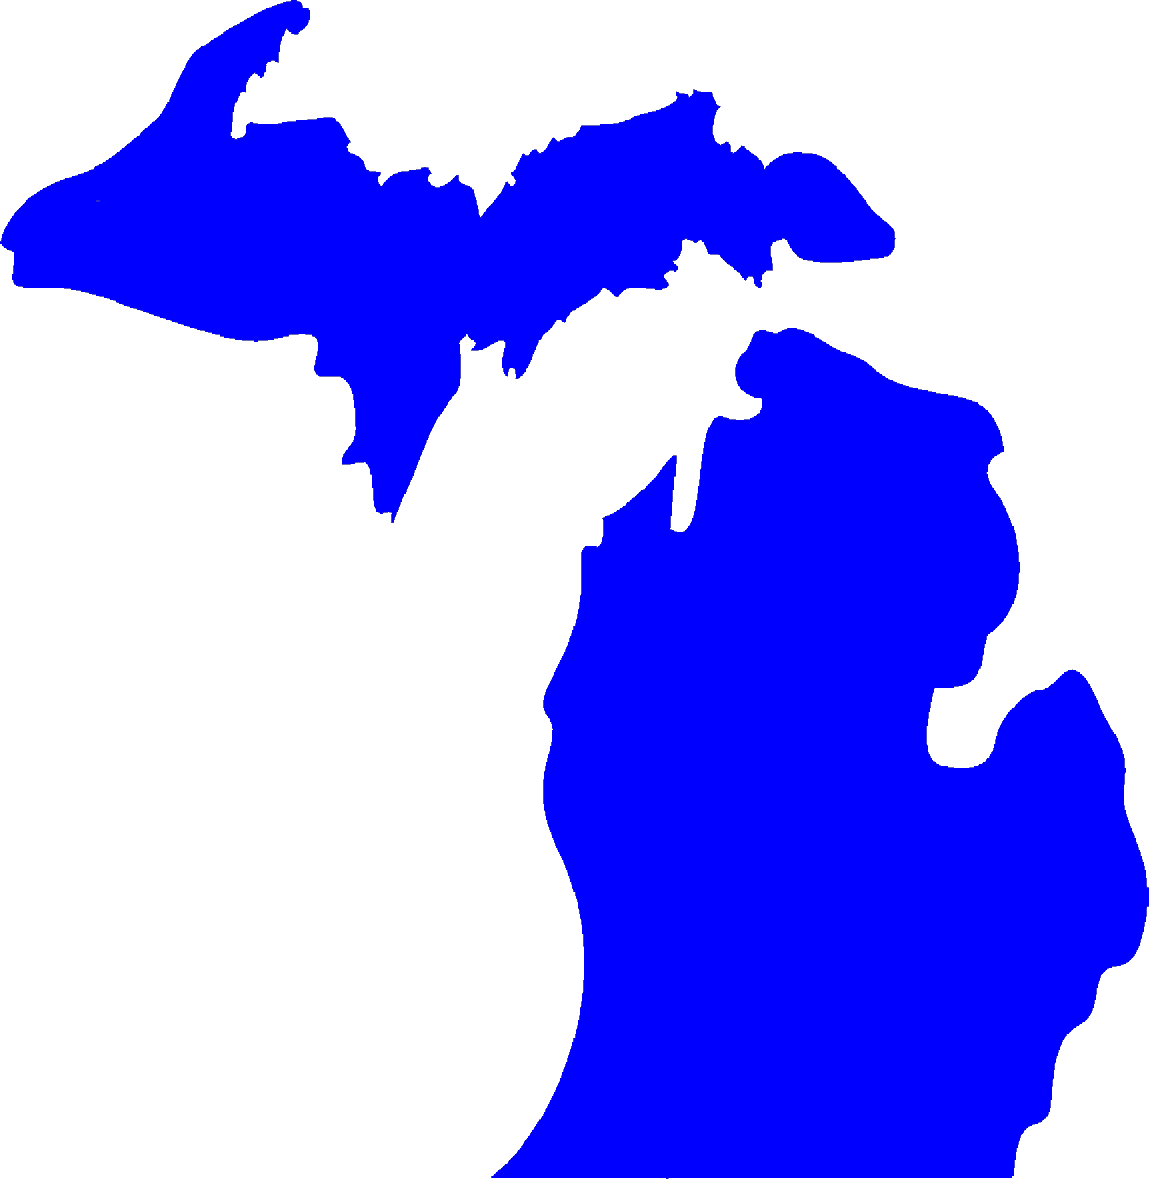 Image of the State of Michigan